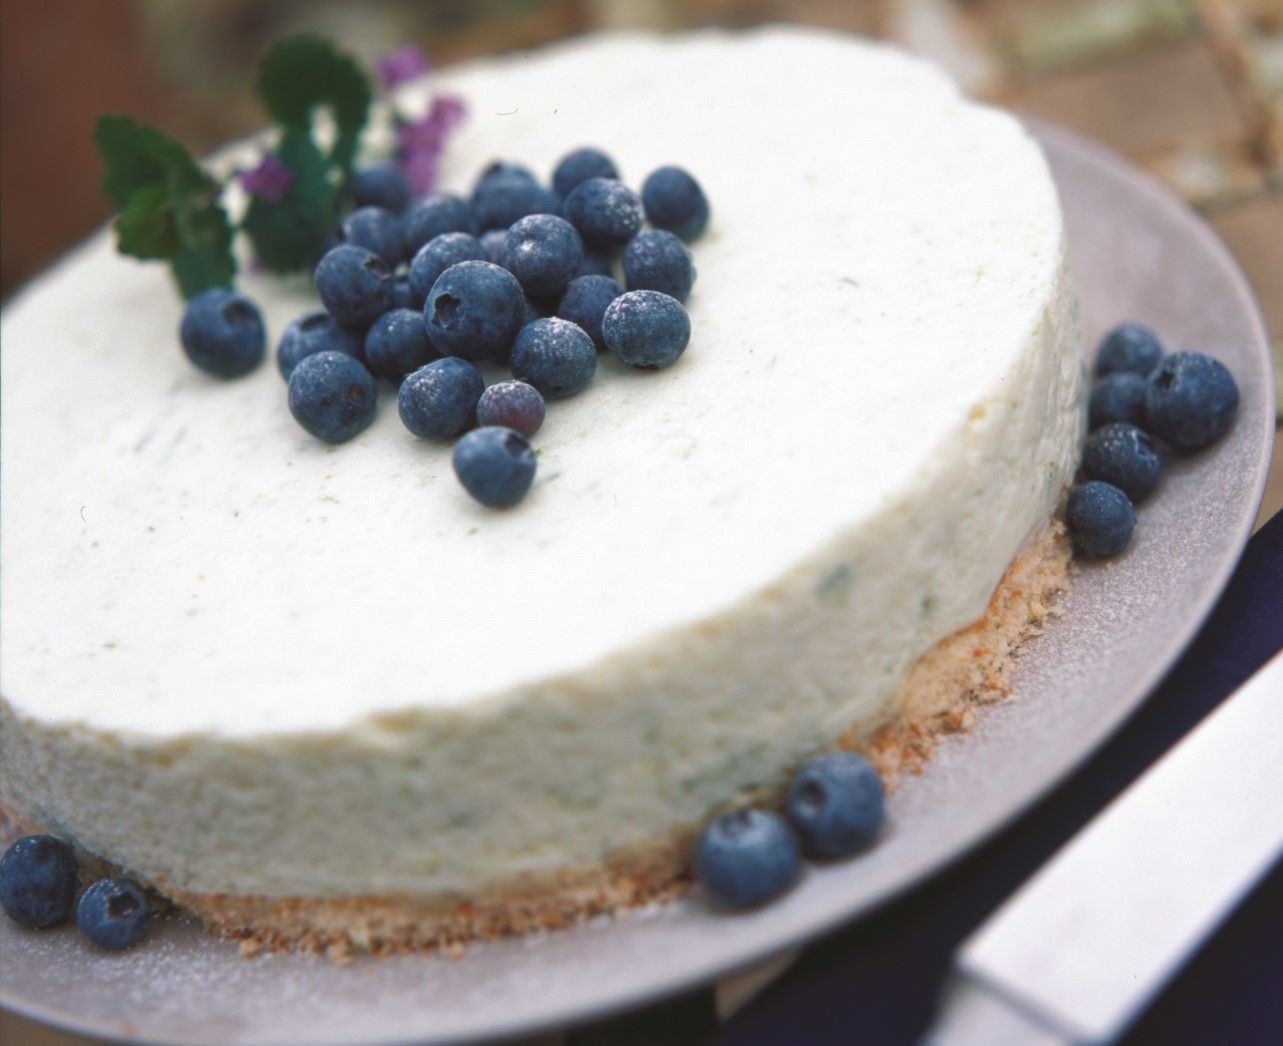 Lime cheesecake is a beautiful round dessert with a creamy looking cheesecake topping on a thin sponge base, garnished with fresh blueberries